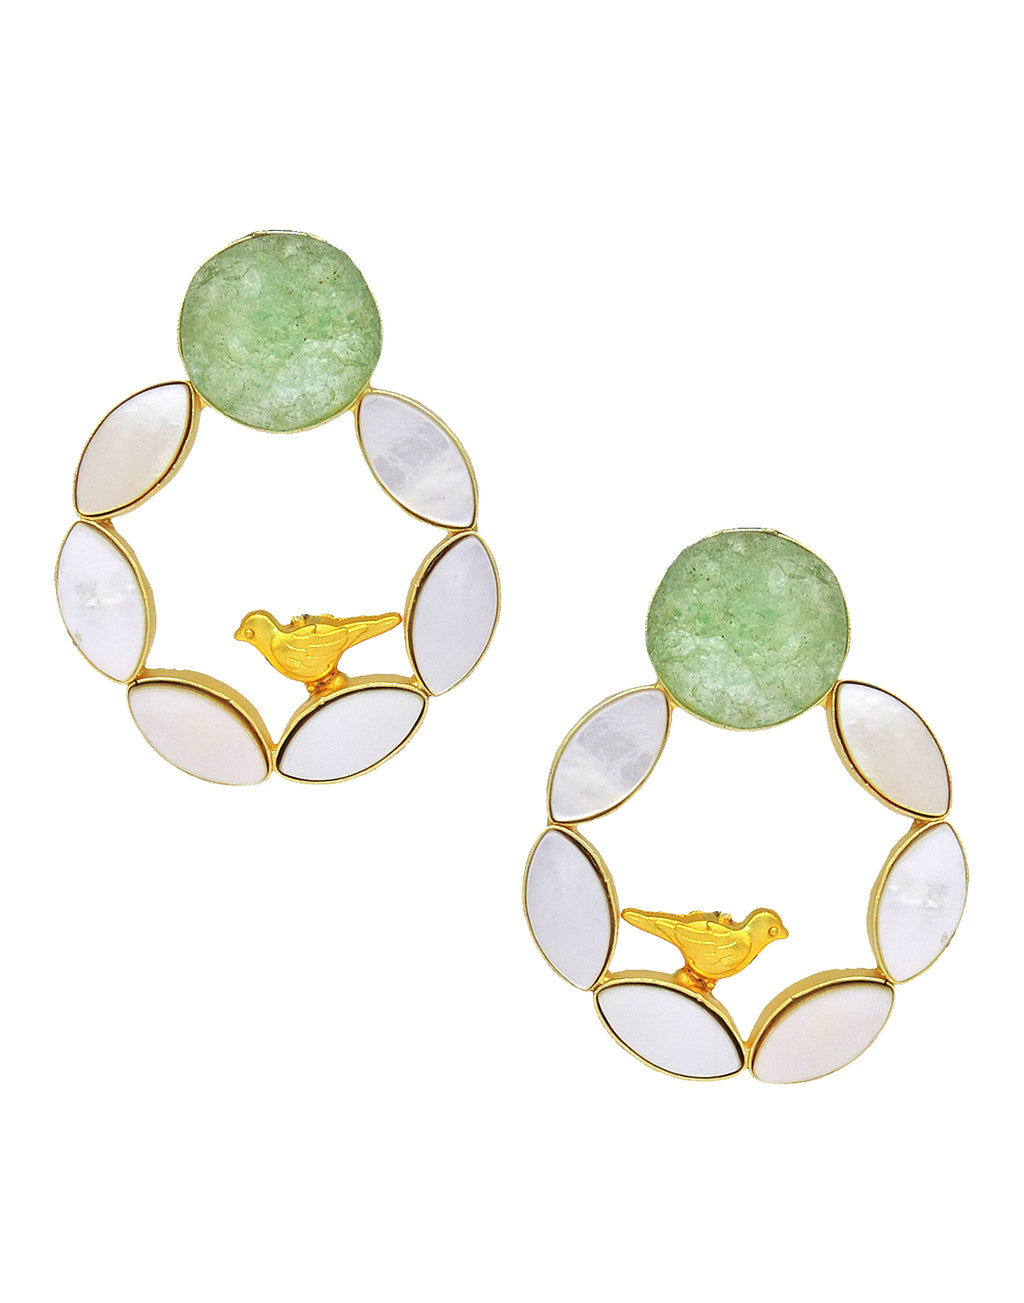 Pearl Cage Earrings (Fluorite) - Statement Earrings - Gold-Plated & Hypoallergenic - Made in India - Dubai Jewellery - Dori